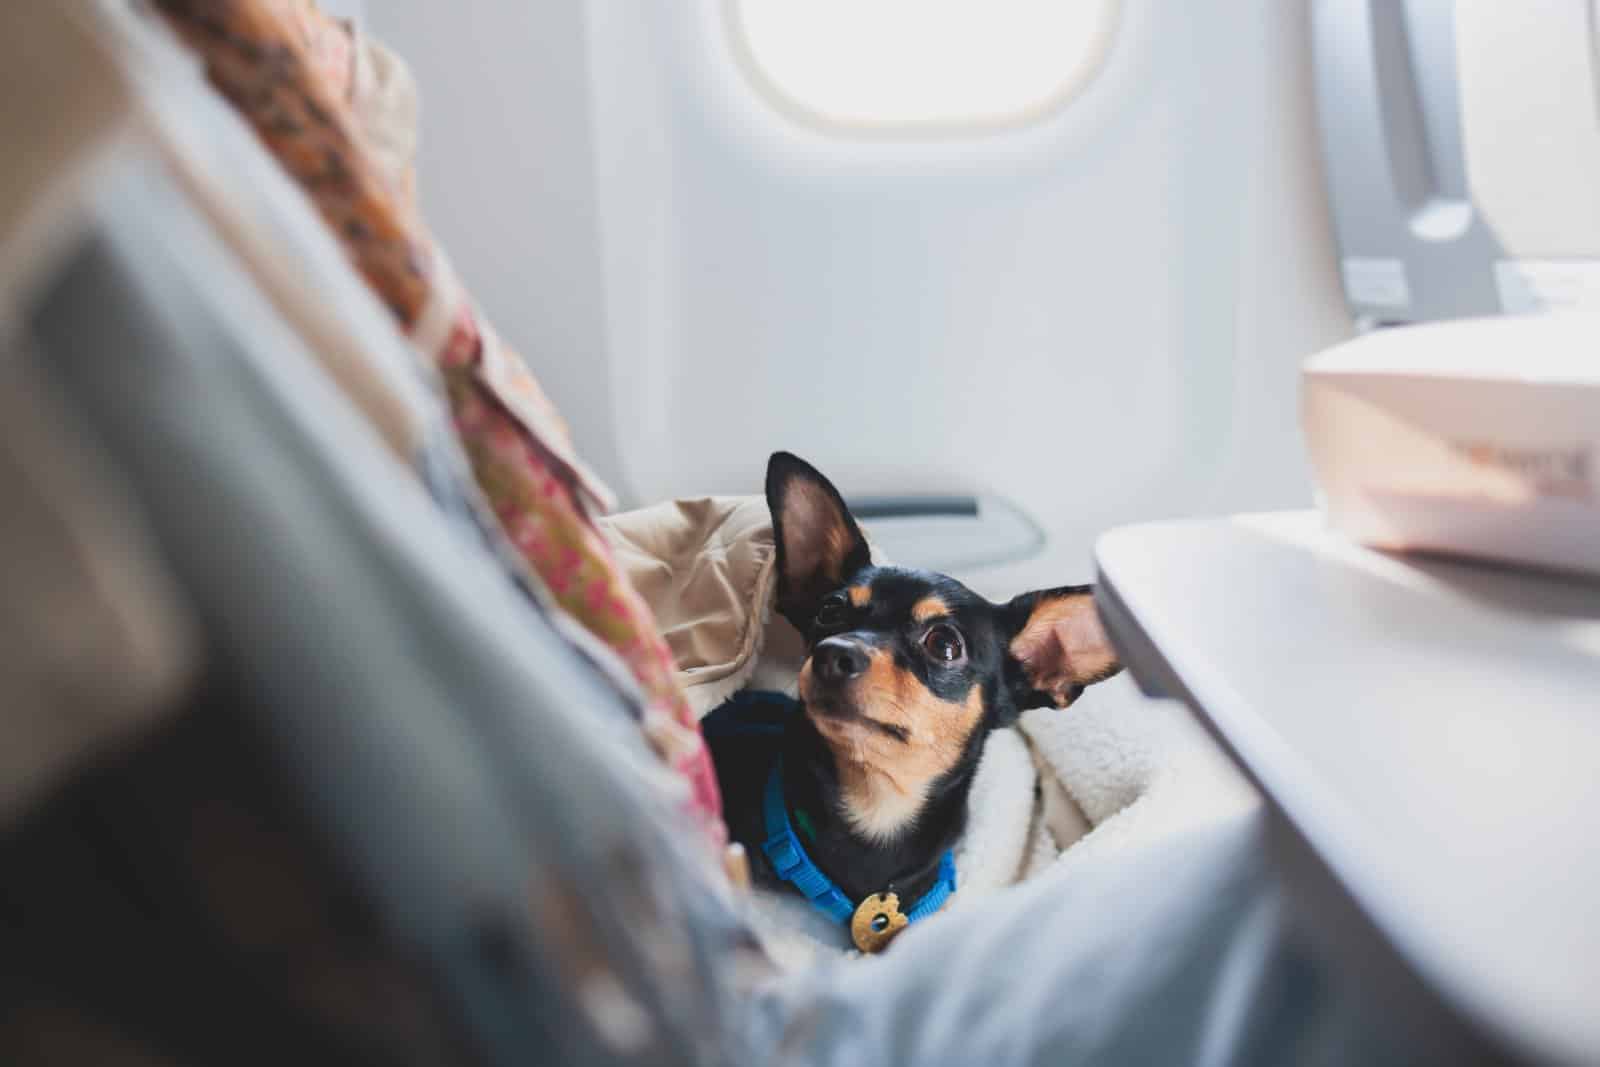 <p class="wp-caption-text">Image Credit: Shutterstock / Tsuguliev</p>  <p><span>Minimize layovers to reduce stress on your pet. Less time in transit is always better.</span></p>